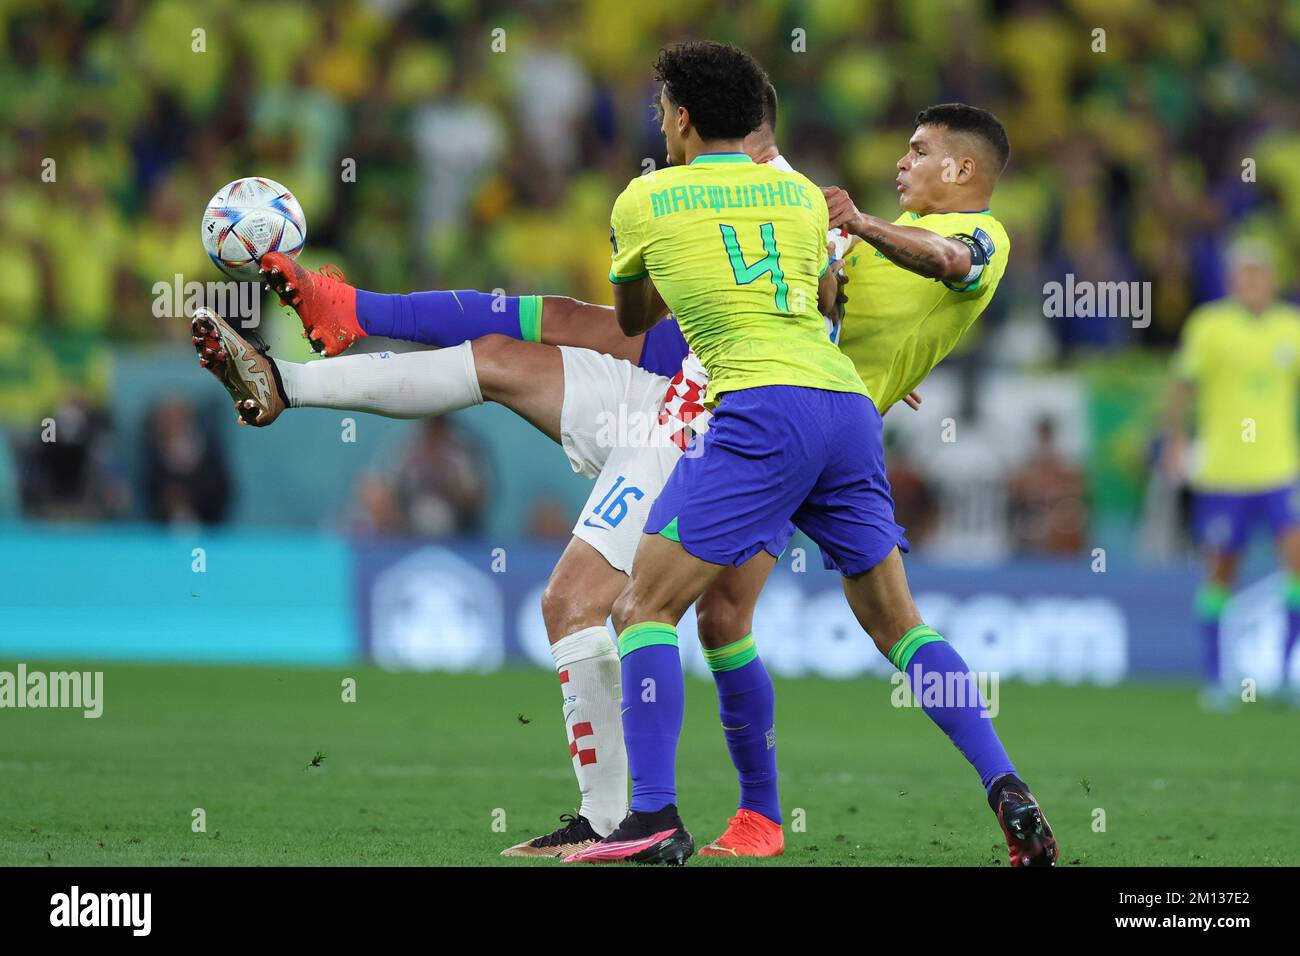 Doha, Qatar. 09th Dec, 2022. Thiago Silva and Marquinhos Brazil player during a match against Bruno Petković Croatia Player valid for the quarterfinals of the FIFA World Cup in Qatar at Education City Stadium in Doha, Qatar. December 9, 2022 Photo:William Volcov Credit: Brazil Photo Press/Alamy Live News Stock Photo